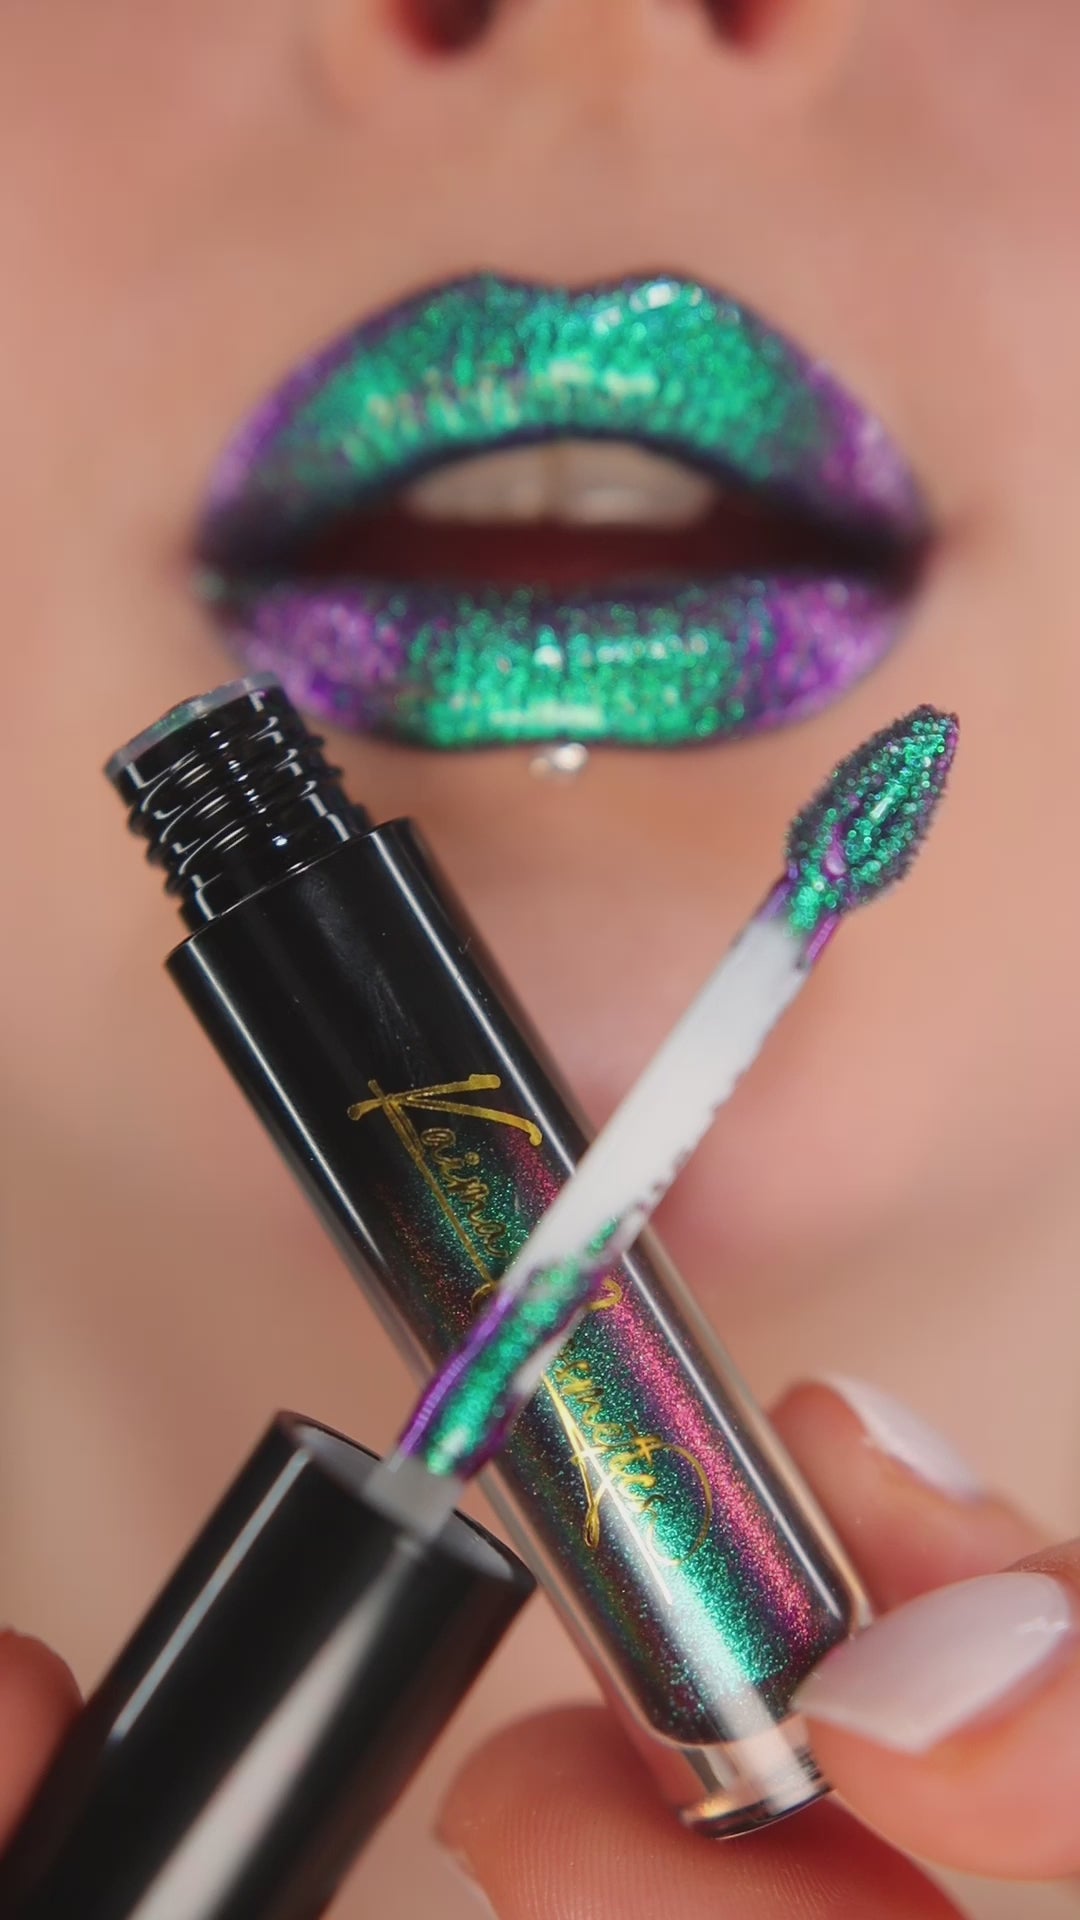 Chrome Prism Lipgloss - Peacock Punch